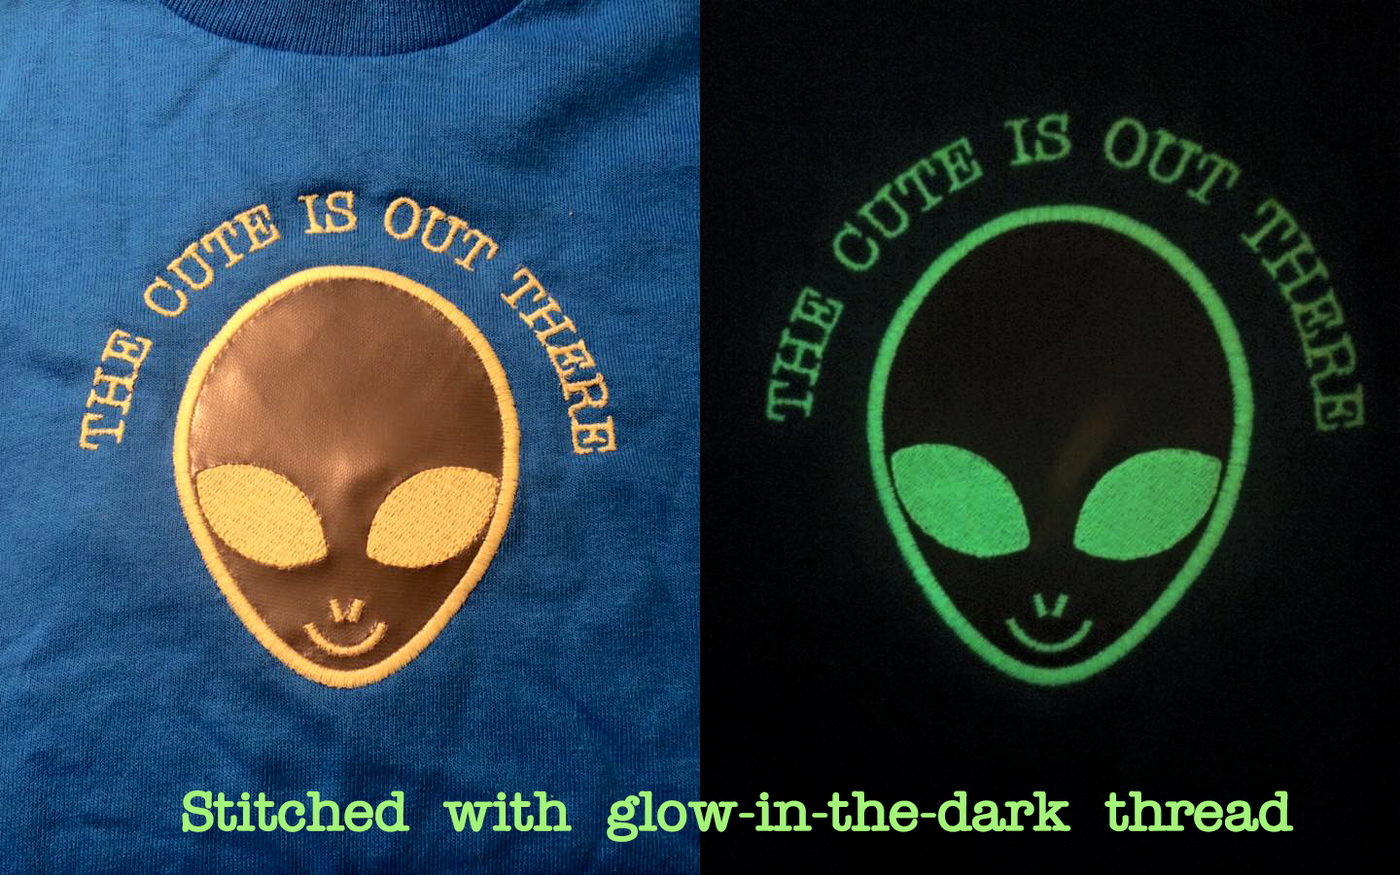 Alien applique with the words "The cute is out there"